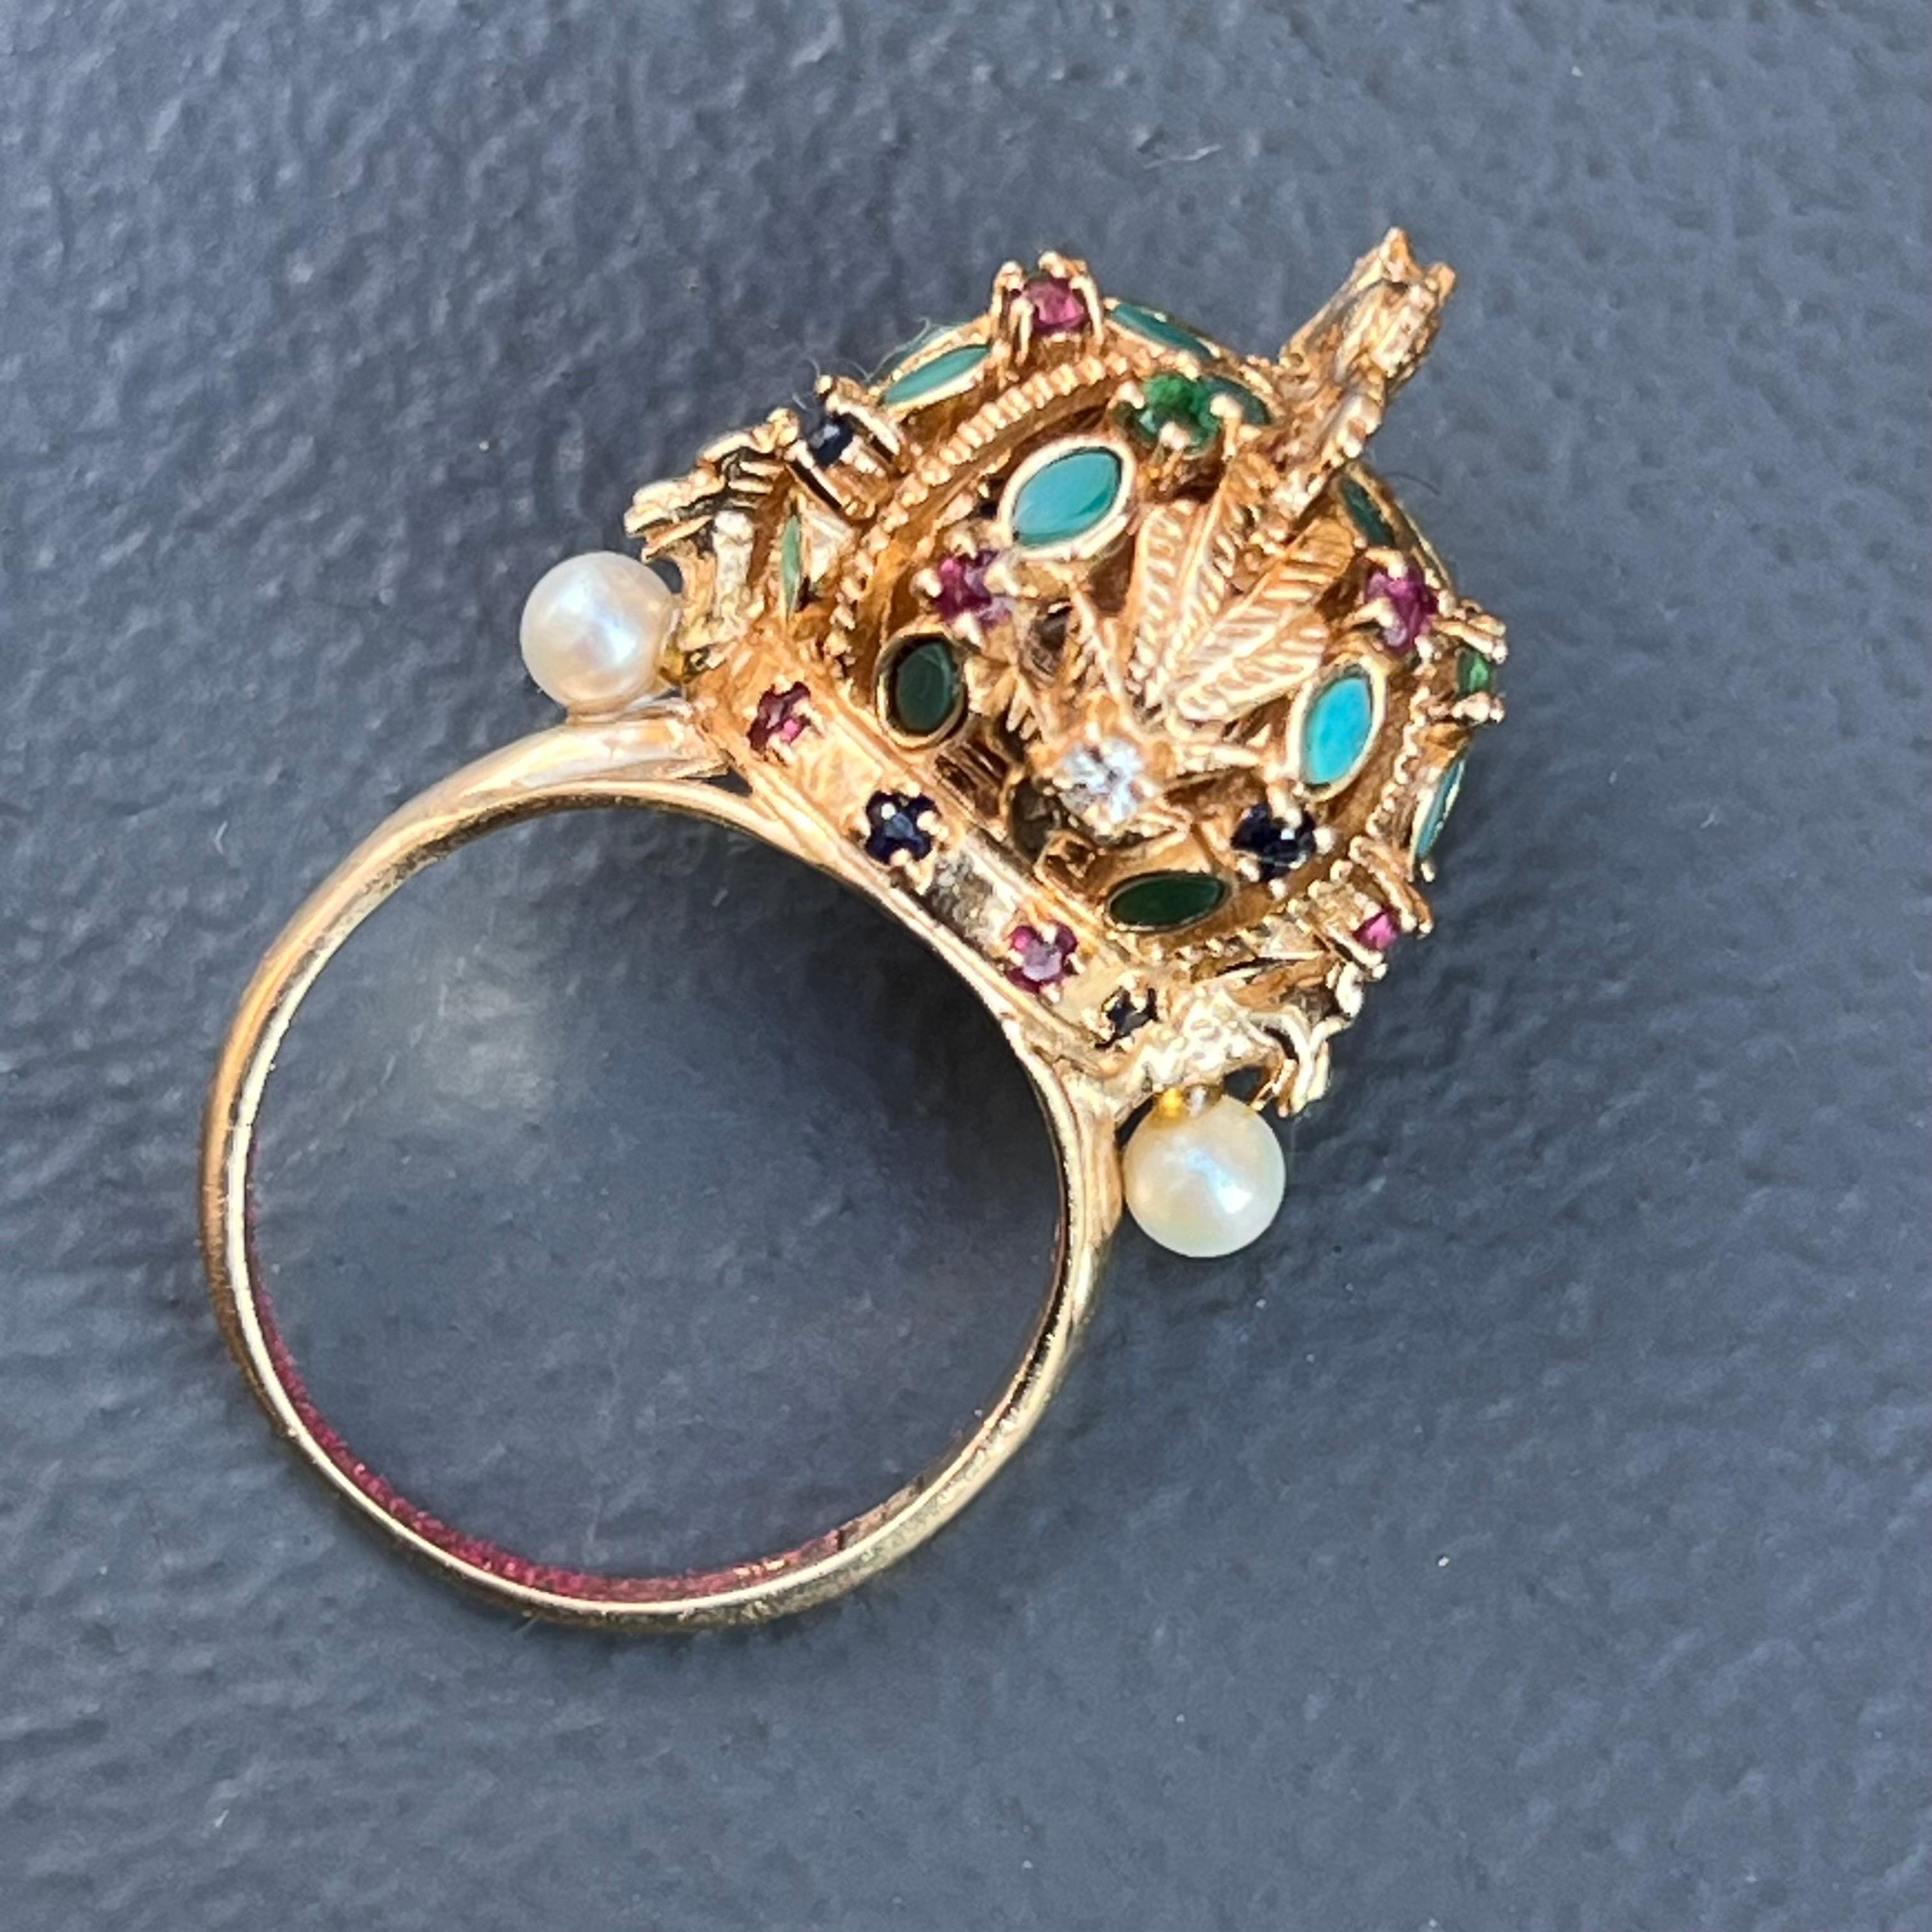 Absolutely beautiful details on this 14kt yellow gold harem ring . Ring has hollow dome top with genuine stones and is topped with a small dragon .
Marked 14kt and faded Chinese mark (looks to me like that) on inner side of band and FM 84 on other